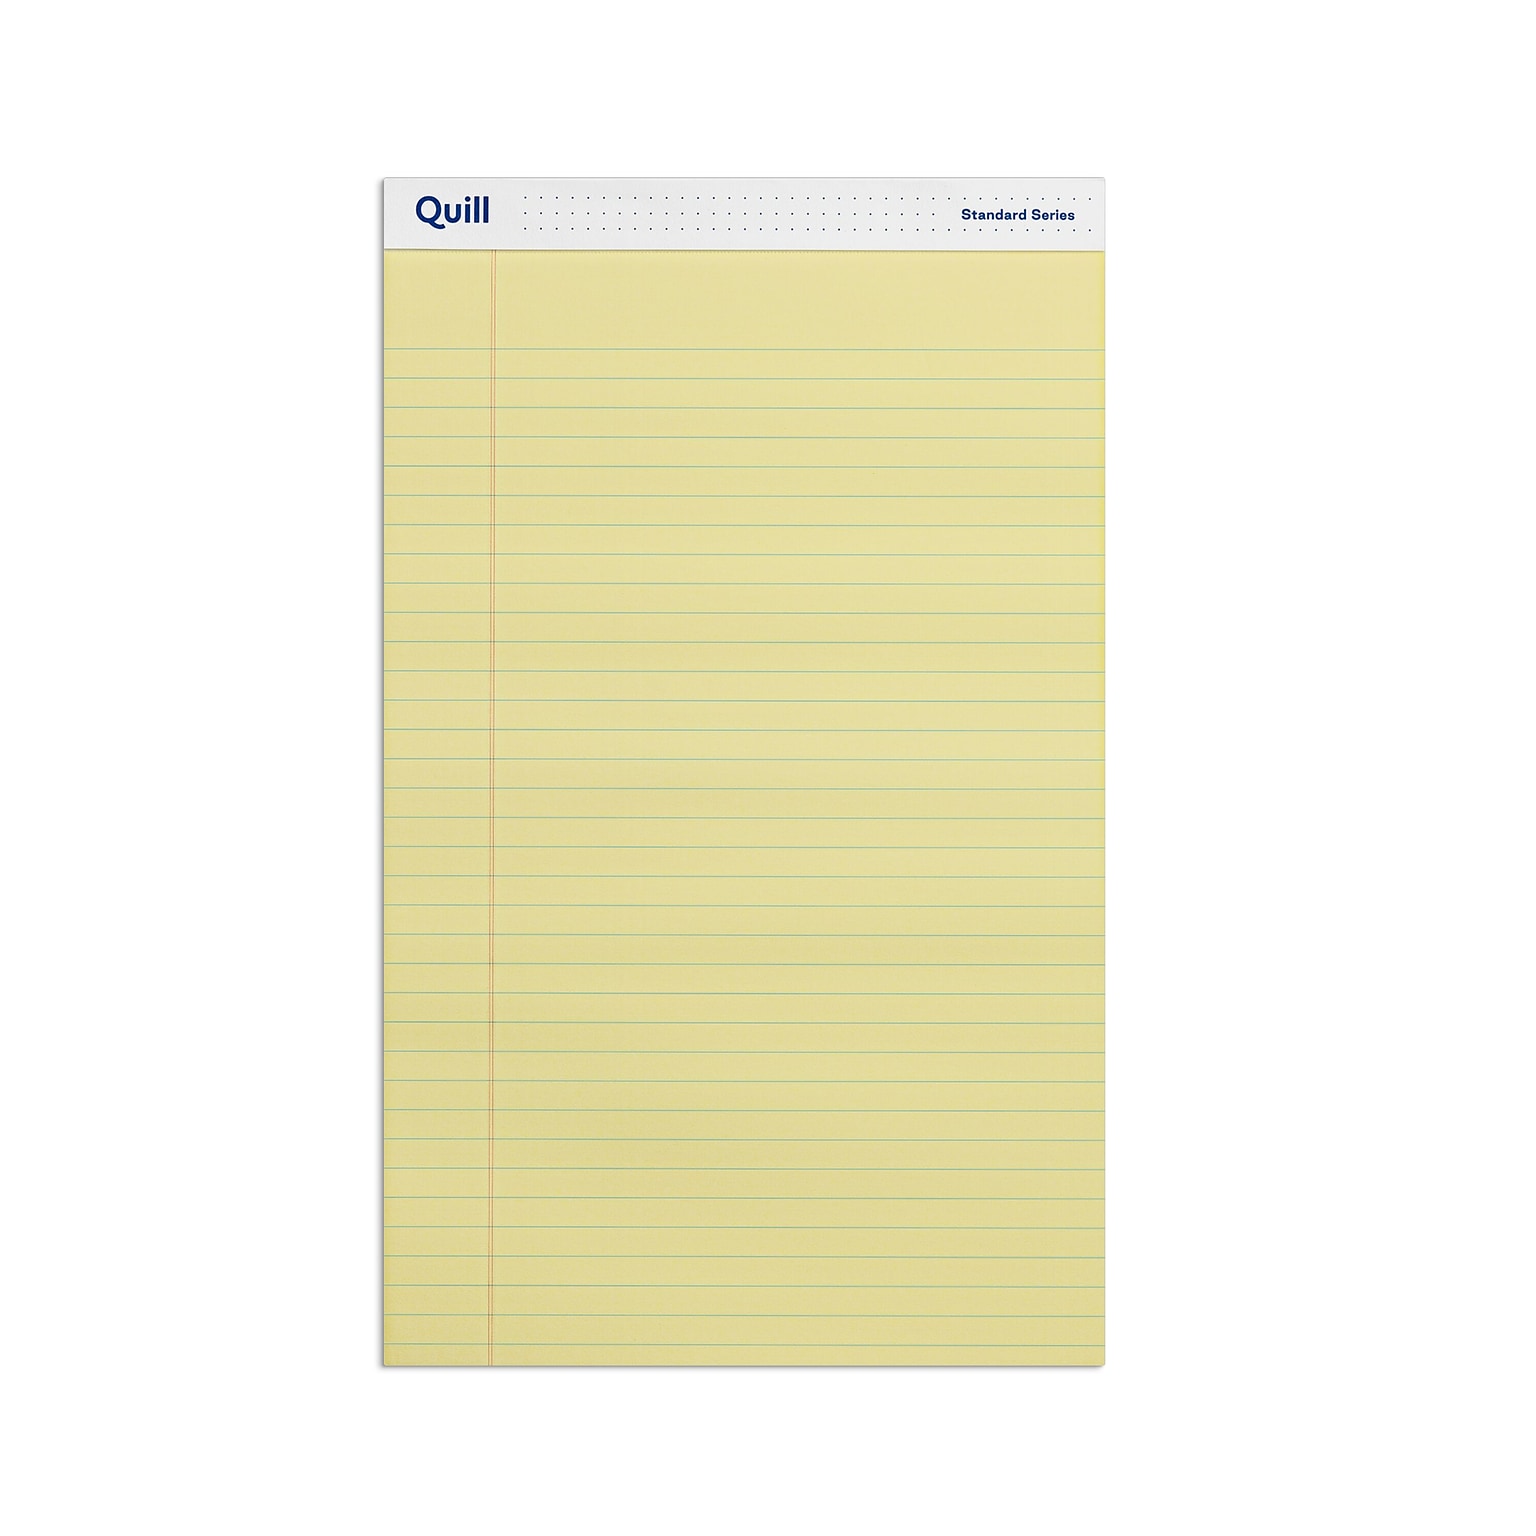 Quill Brand® Standard Series Legal Pad, 8-1/2 x 14, Wide Ruled, Canary Yellow, 50 Sheets/Pad, 12 Pads/Pack (740022L)